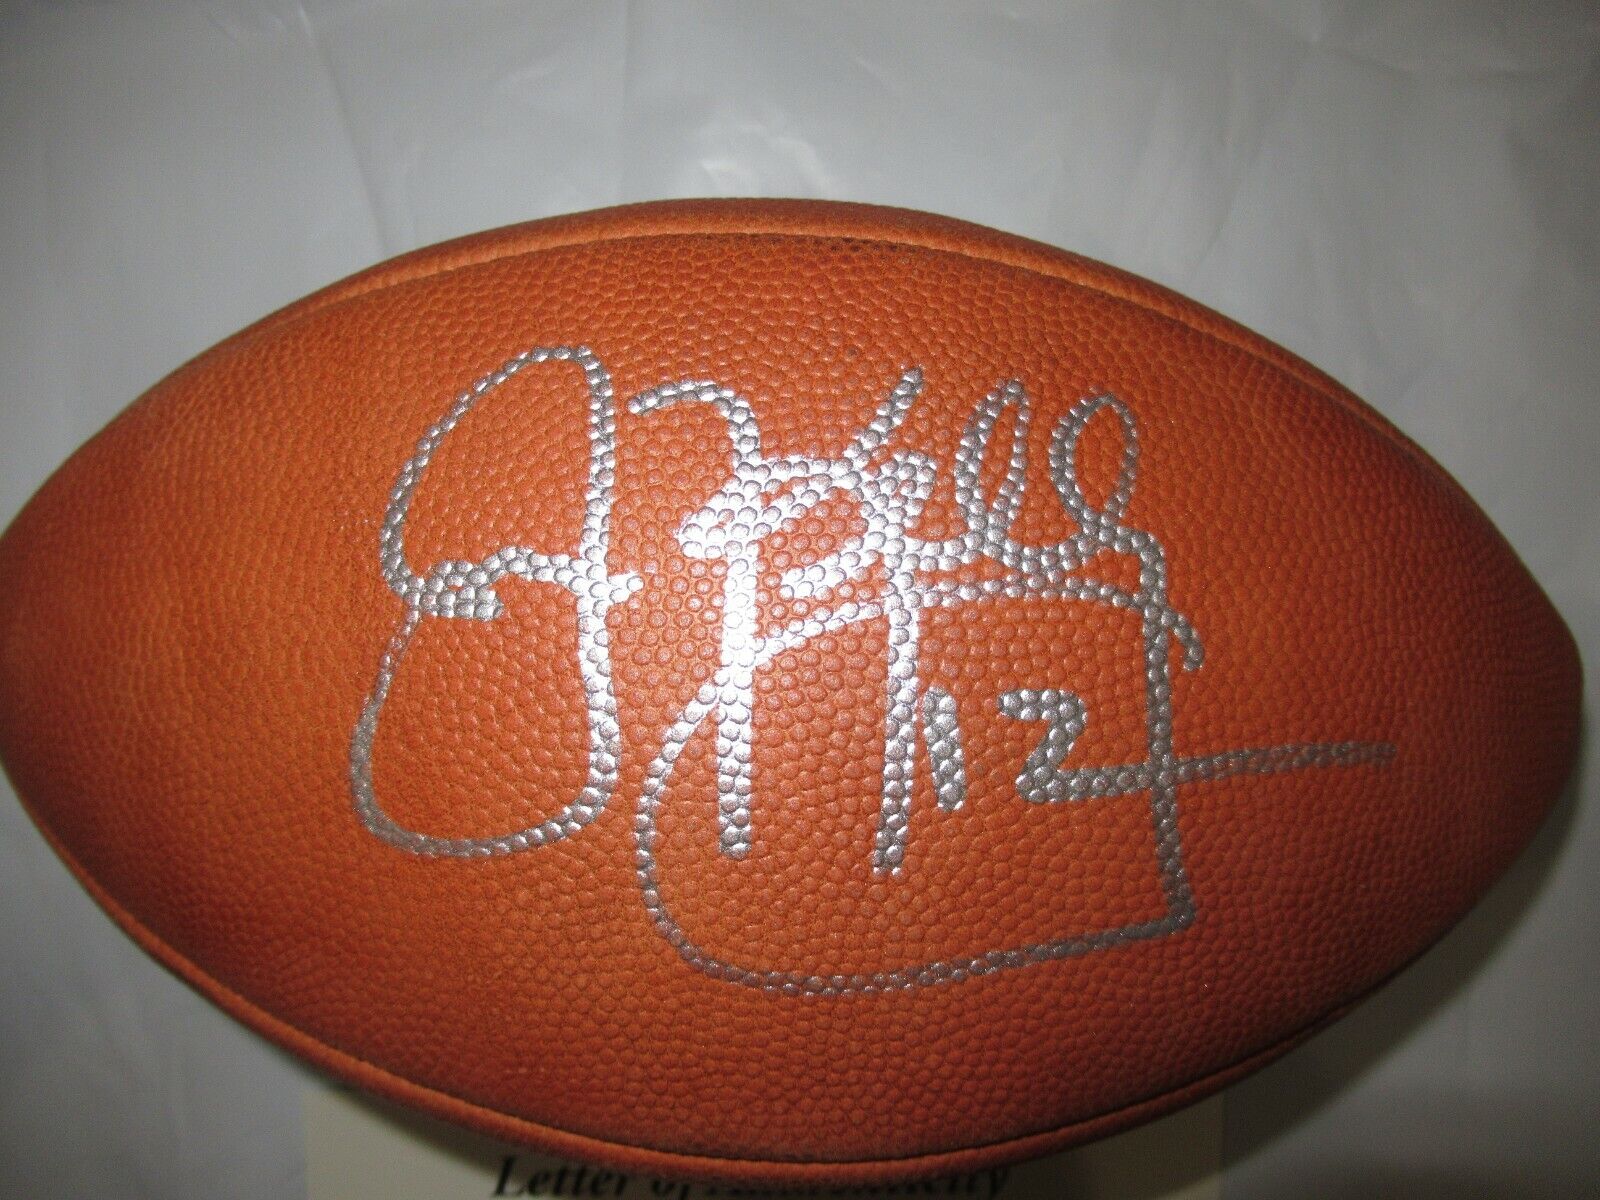 RARE  USFL FOOTBALL signed by JIM KELLY with a Letter of Authenticity from JSA